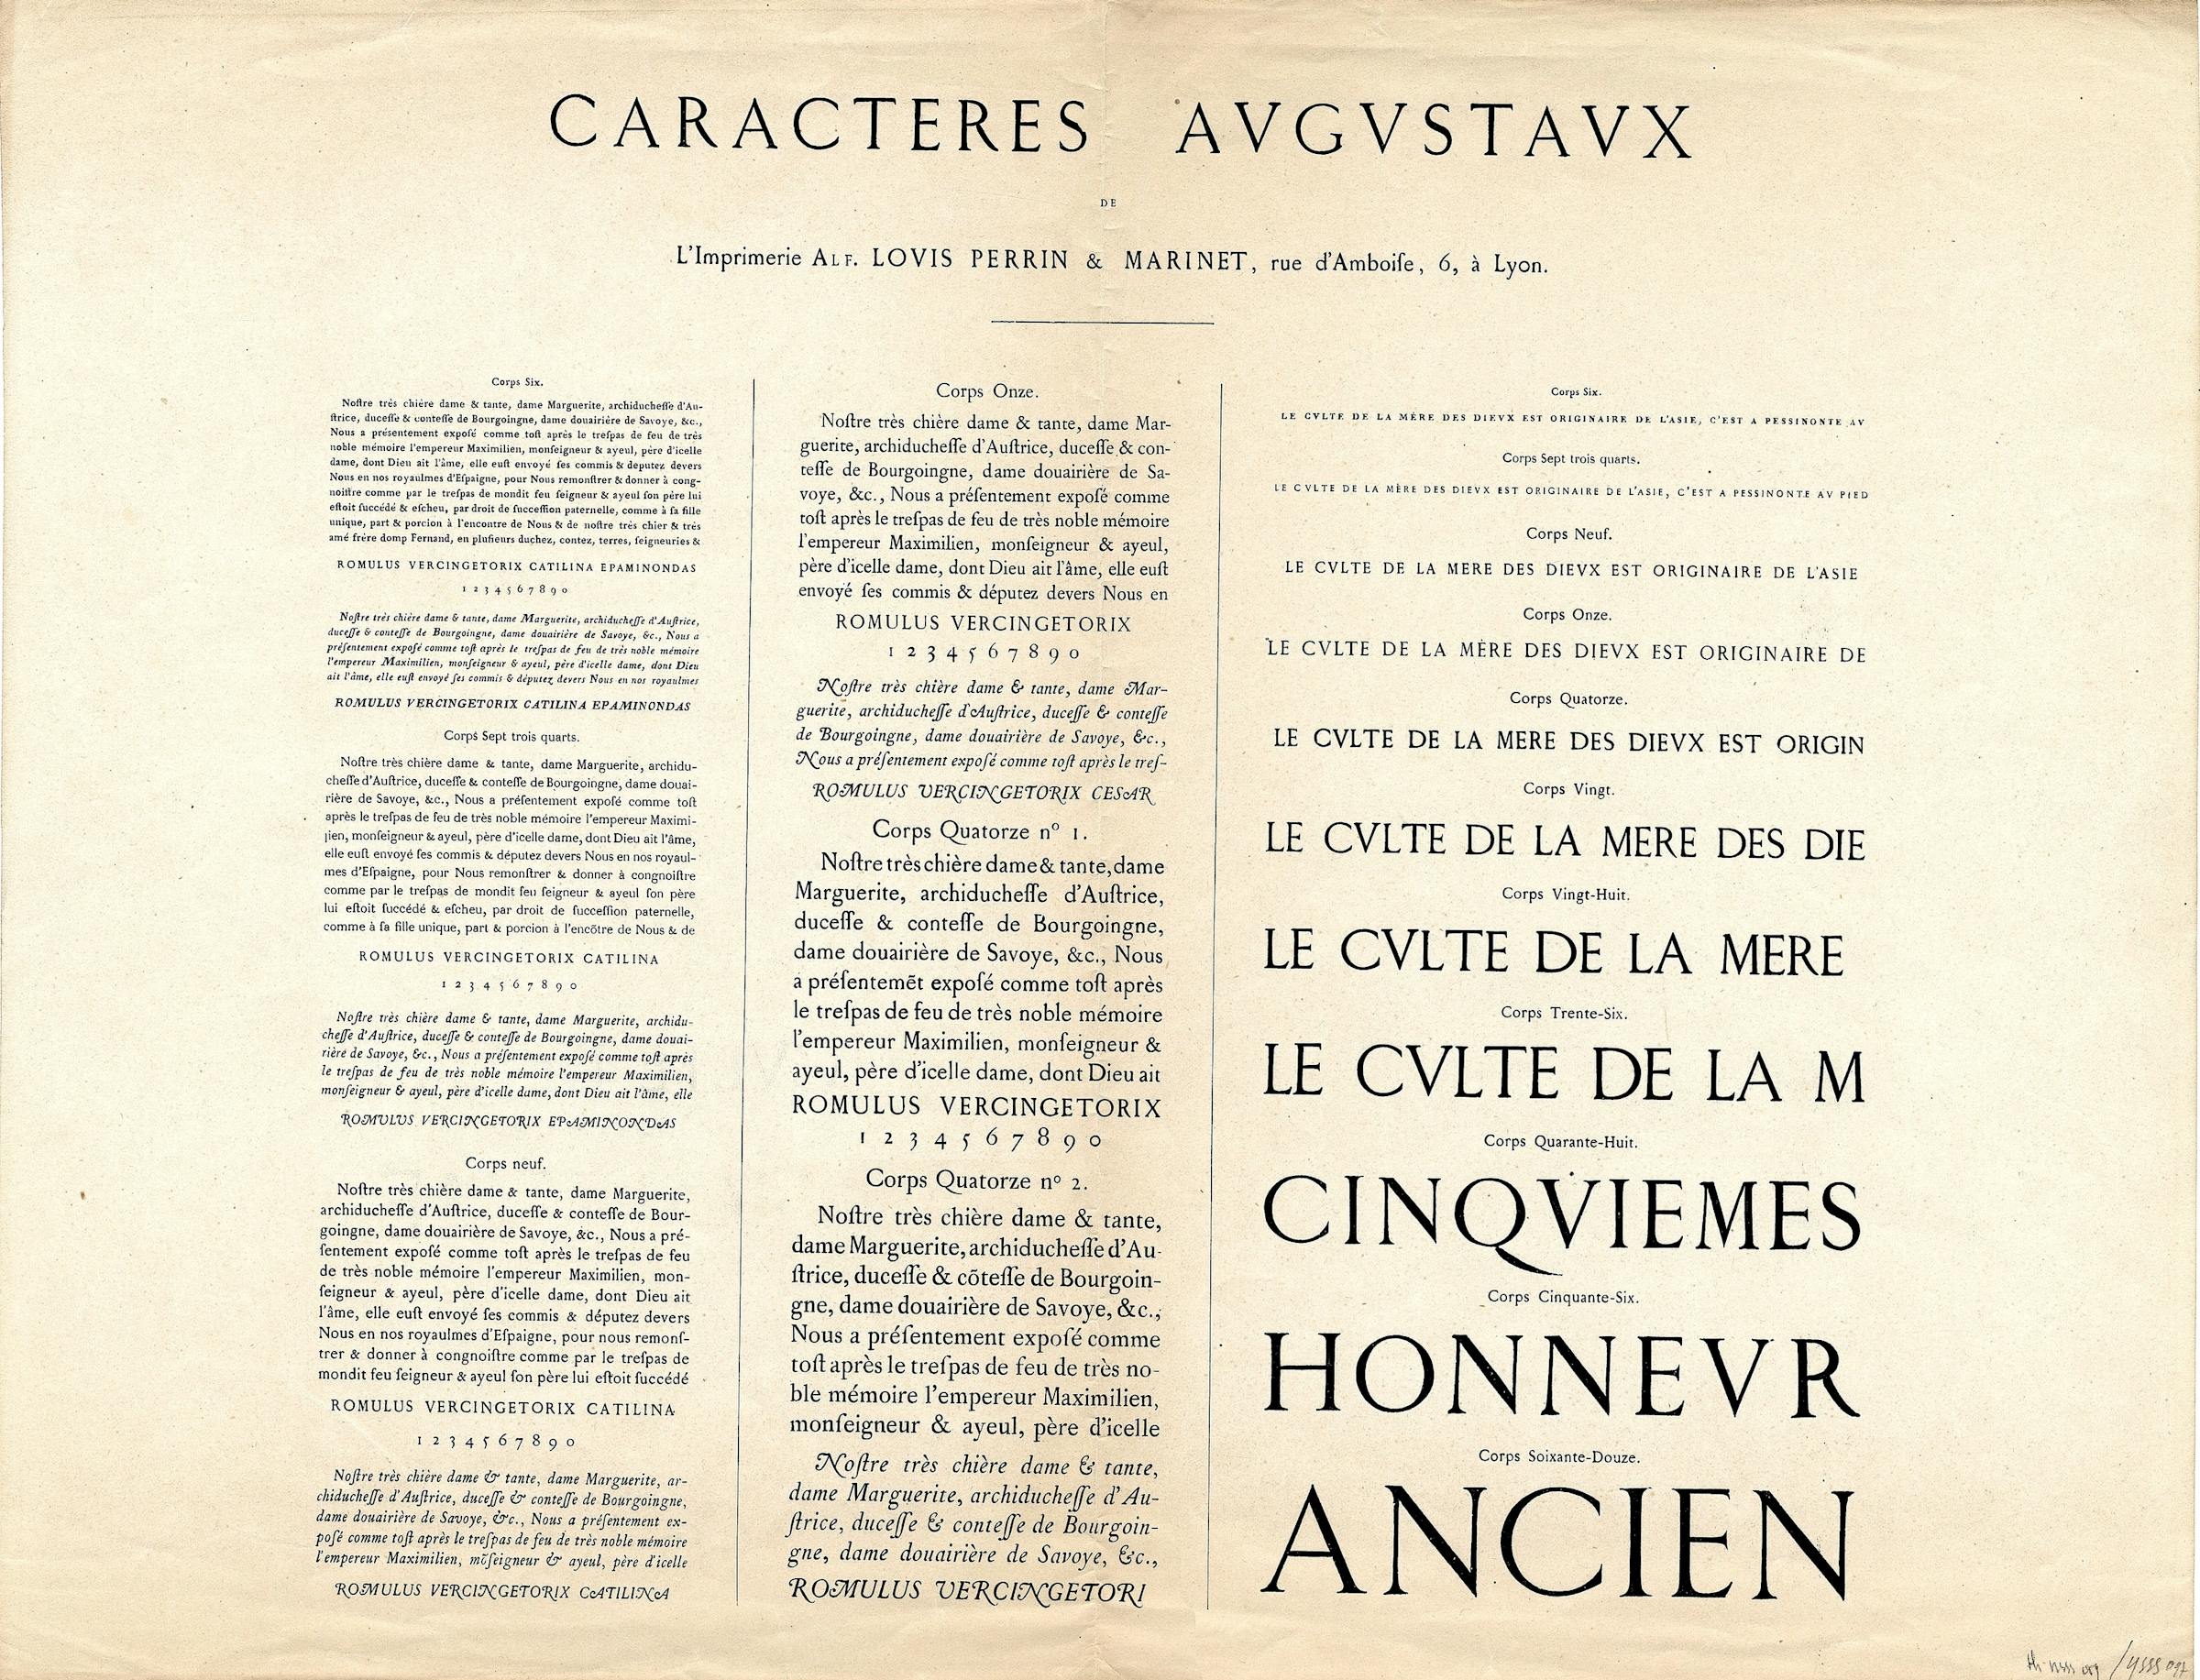 The Elzevirian revival: reclaiming Renaissance excellence in nineteenth-century French typography